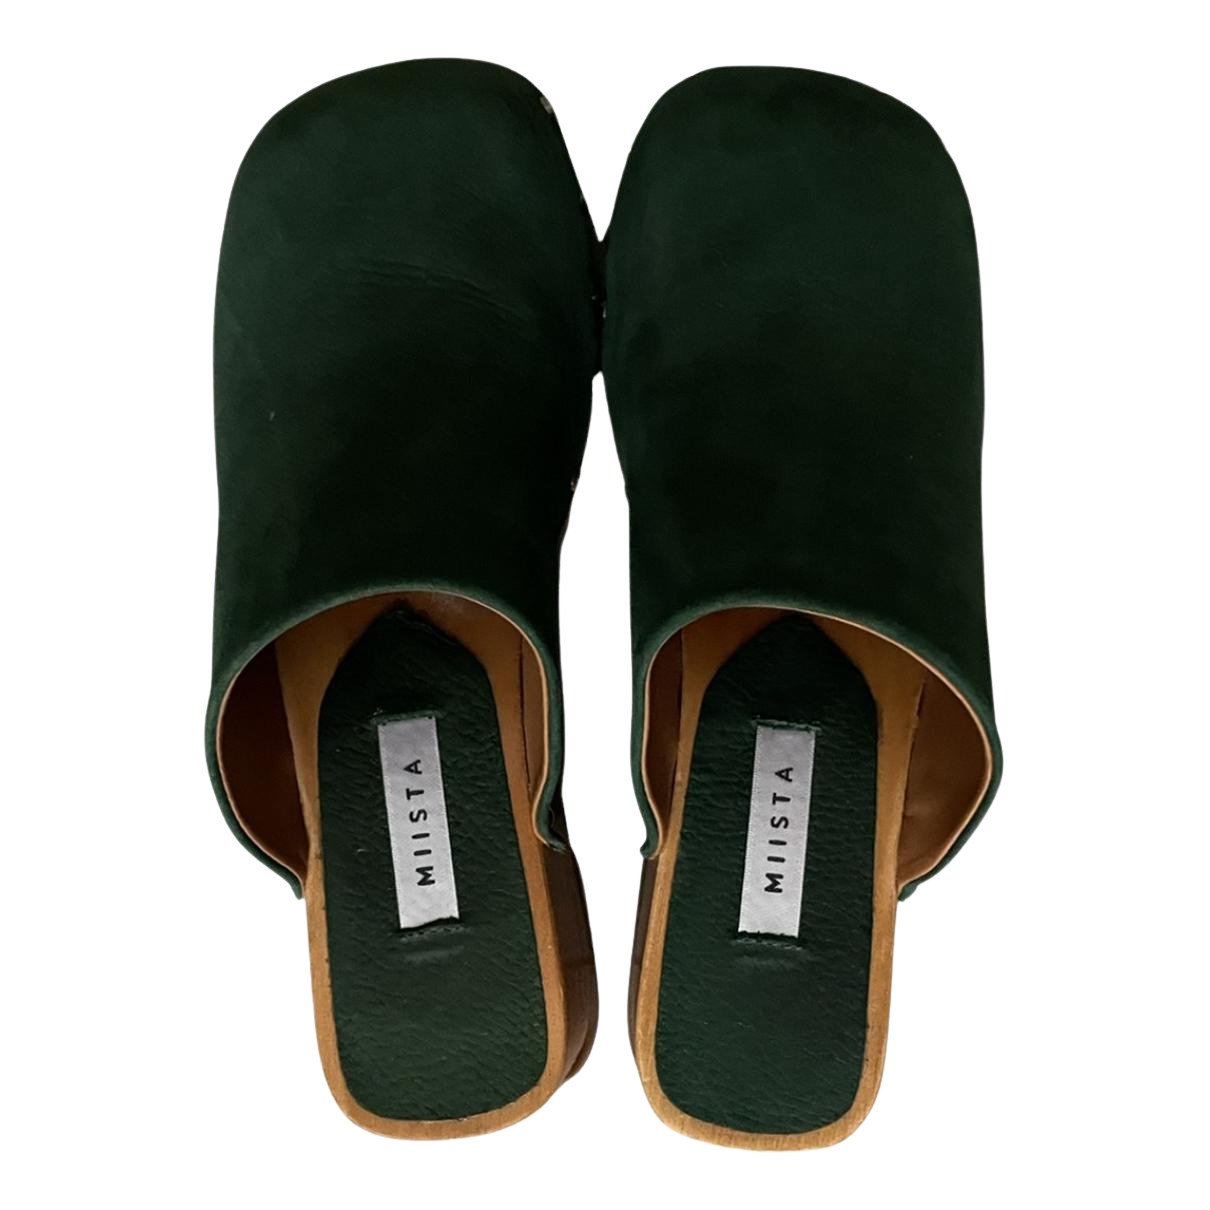 https://storage.googleapis.com/download/storage/v1/b/whering.appspot.com/o/marketplace_product_images%2Fmiista-leather-mules-clogs-emerald-green-44MmGzeUScNuo95srFtMgQ.png?generation=1689742843943539&alt=media